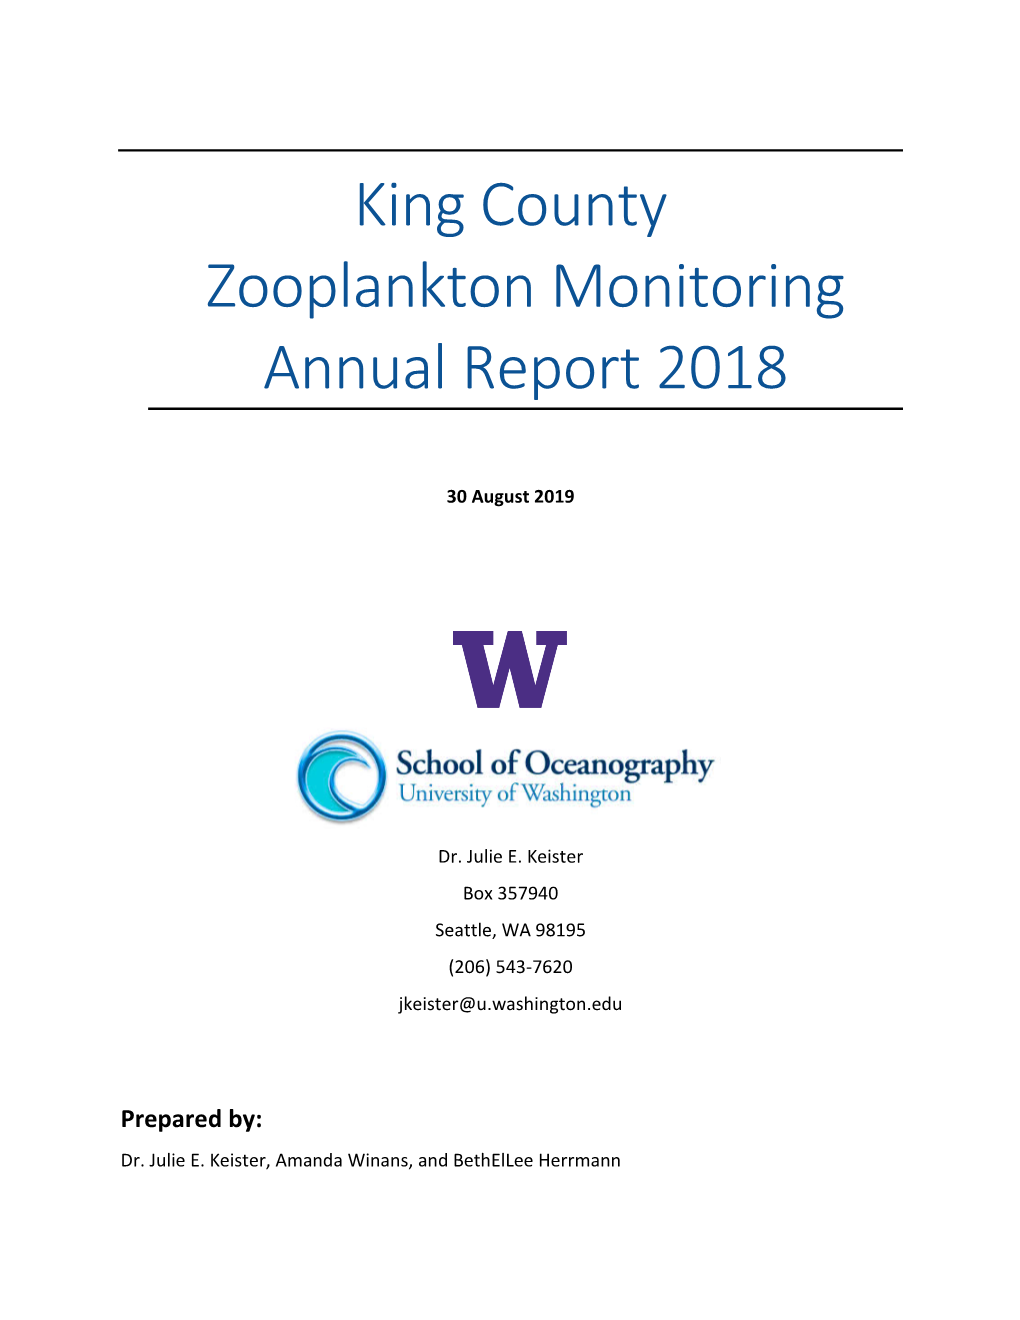 King County Zooplankton Monitoring Annual Report 2018